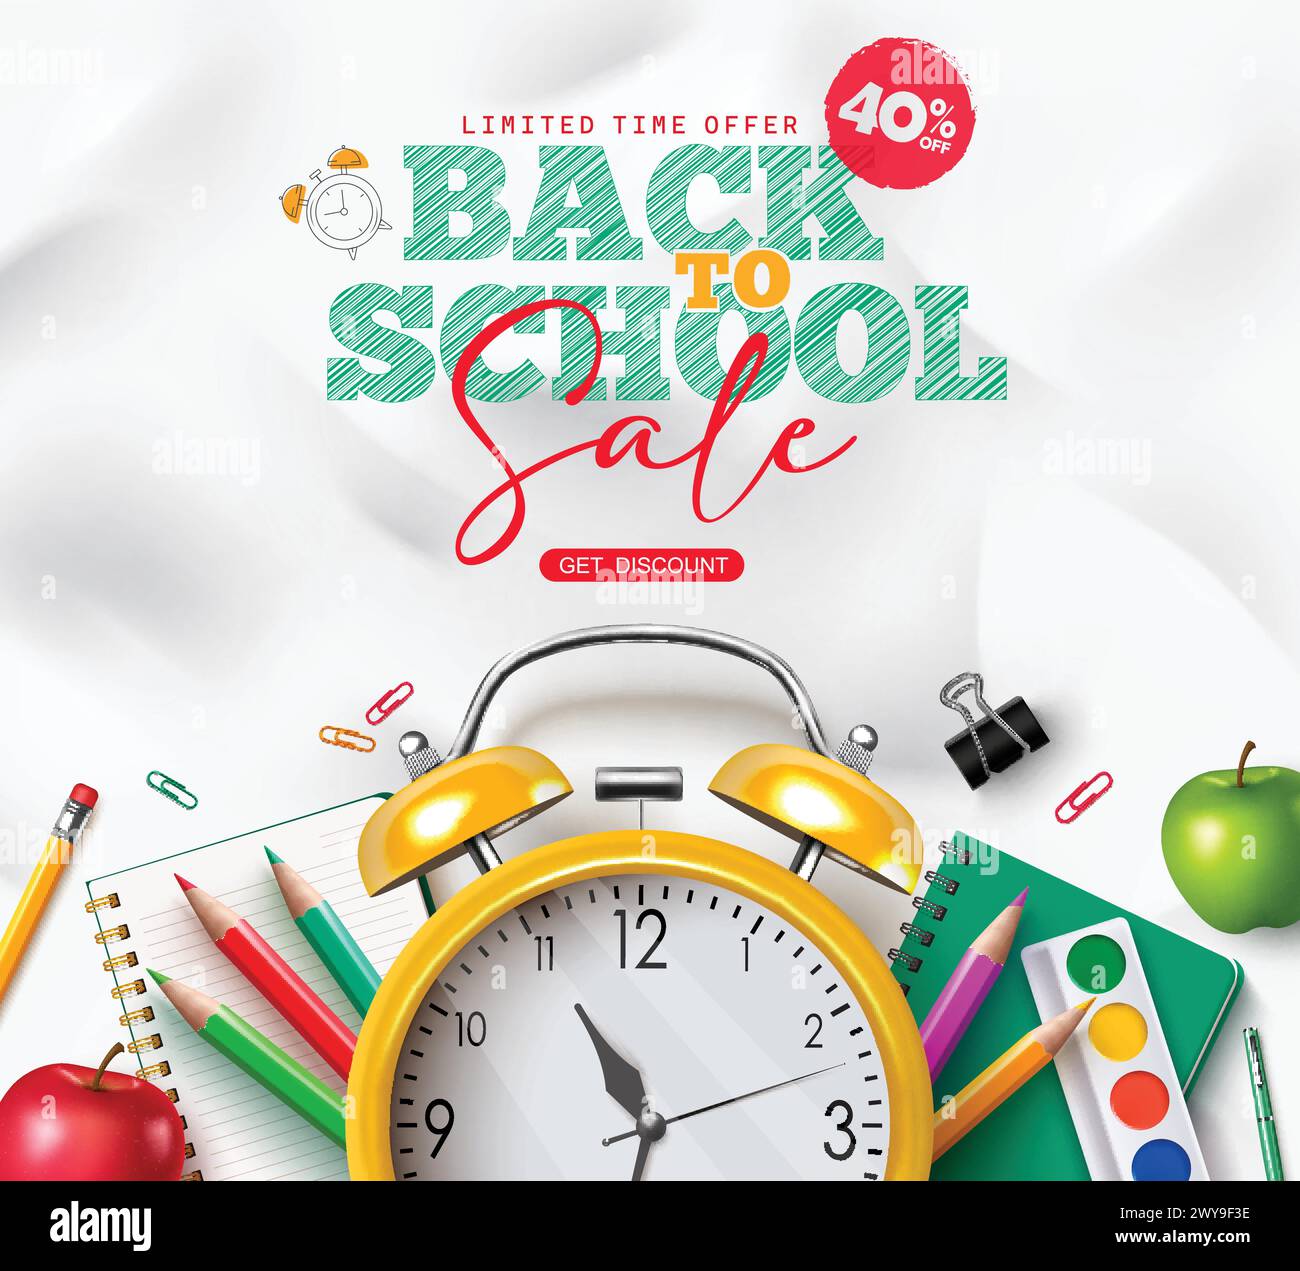 Back to school sale text vector banner design. Back to school limited time offer with alarm clock, color pencil and notebook elements for shopping Stock Vector